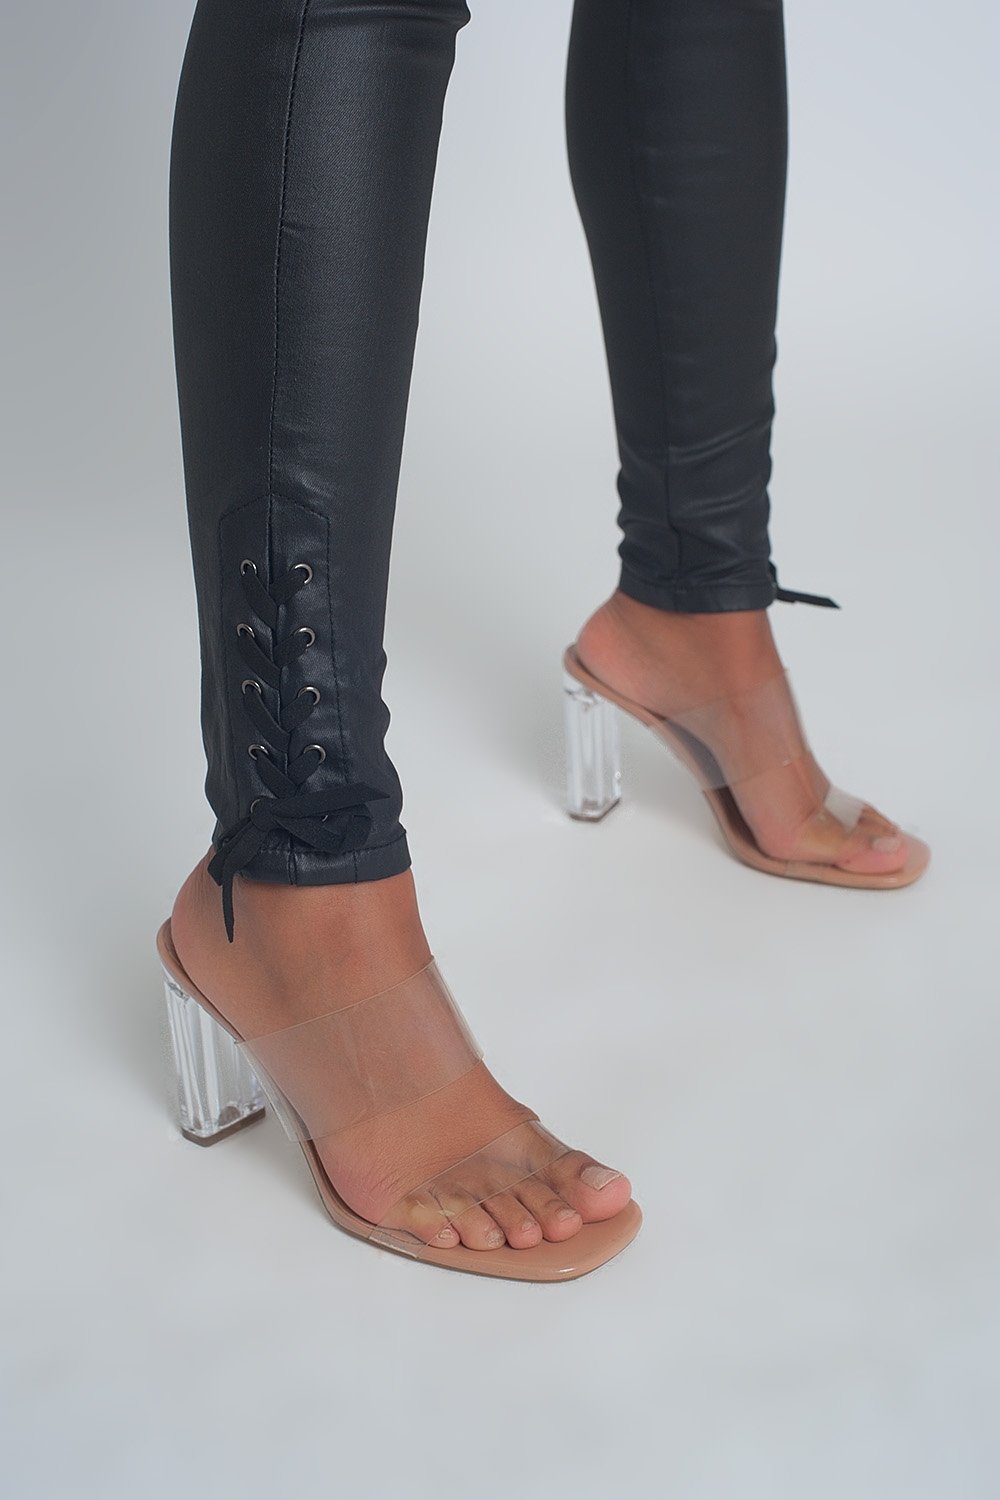 Black Leather Effect Trousers With Hem Lace-Up - LOLA LUXE